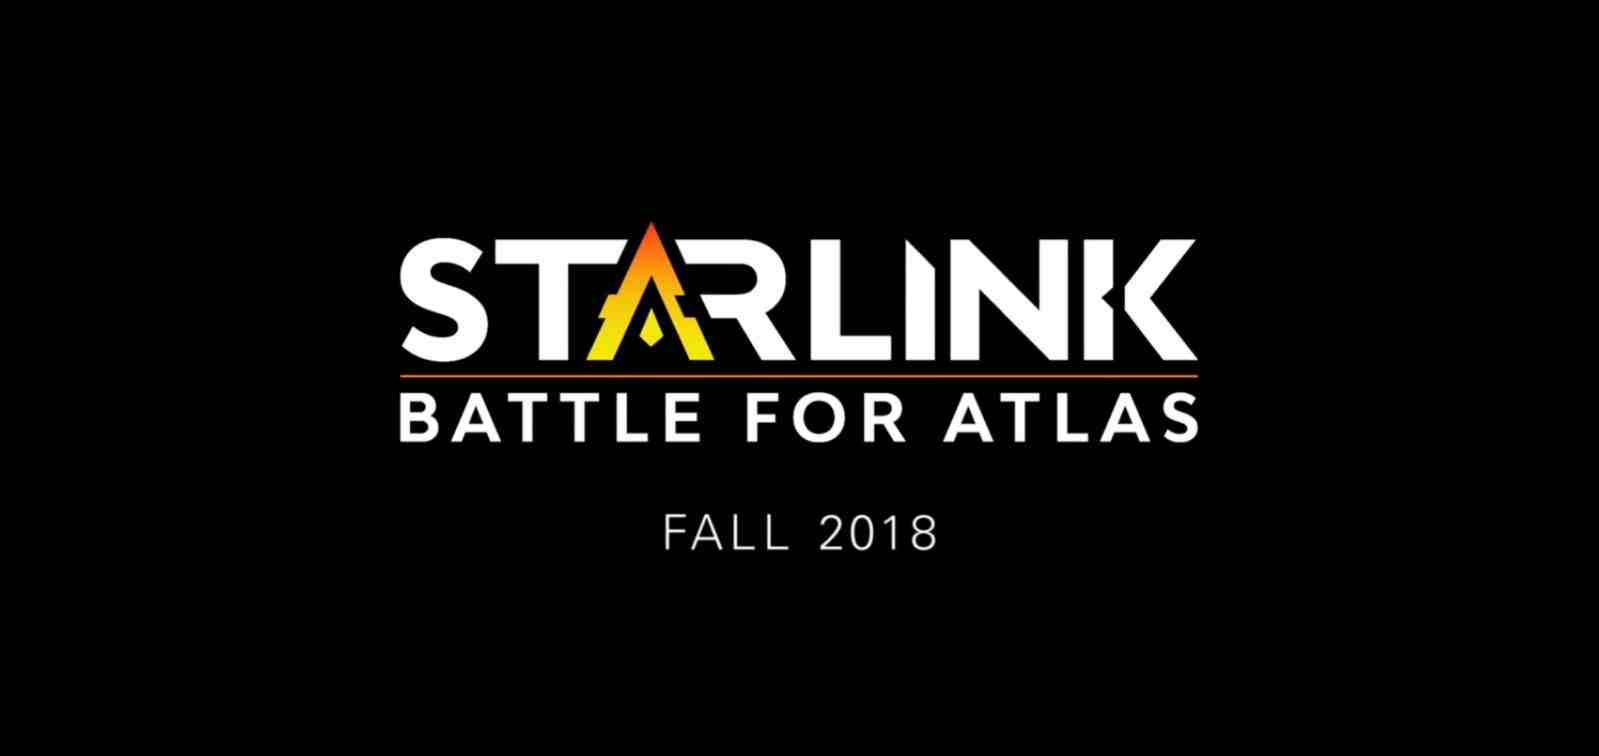 annunciato starlink battle for atlas in arrivo pc ps4 xbox one switch v5 295502